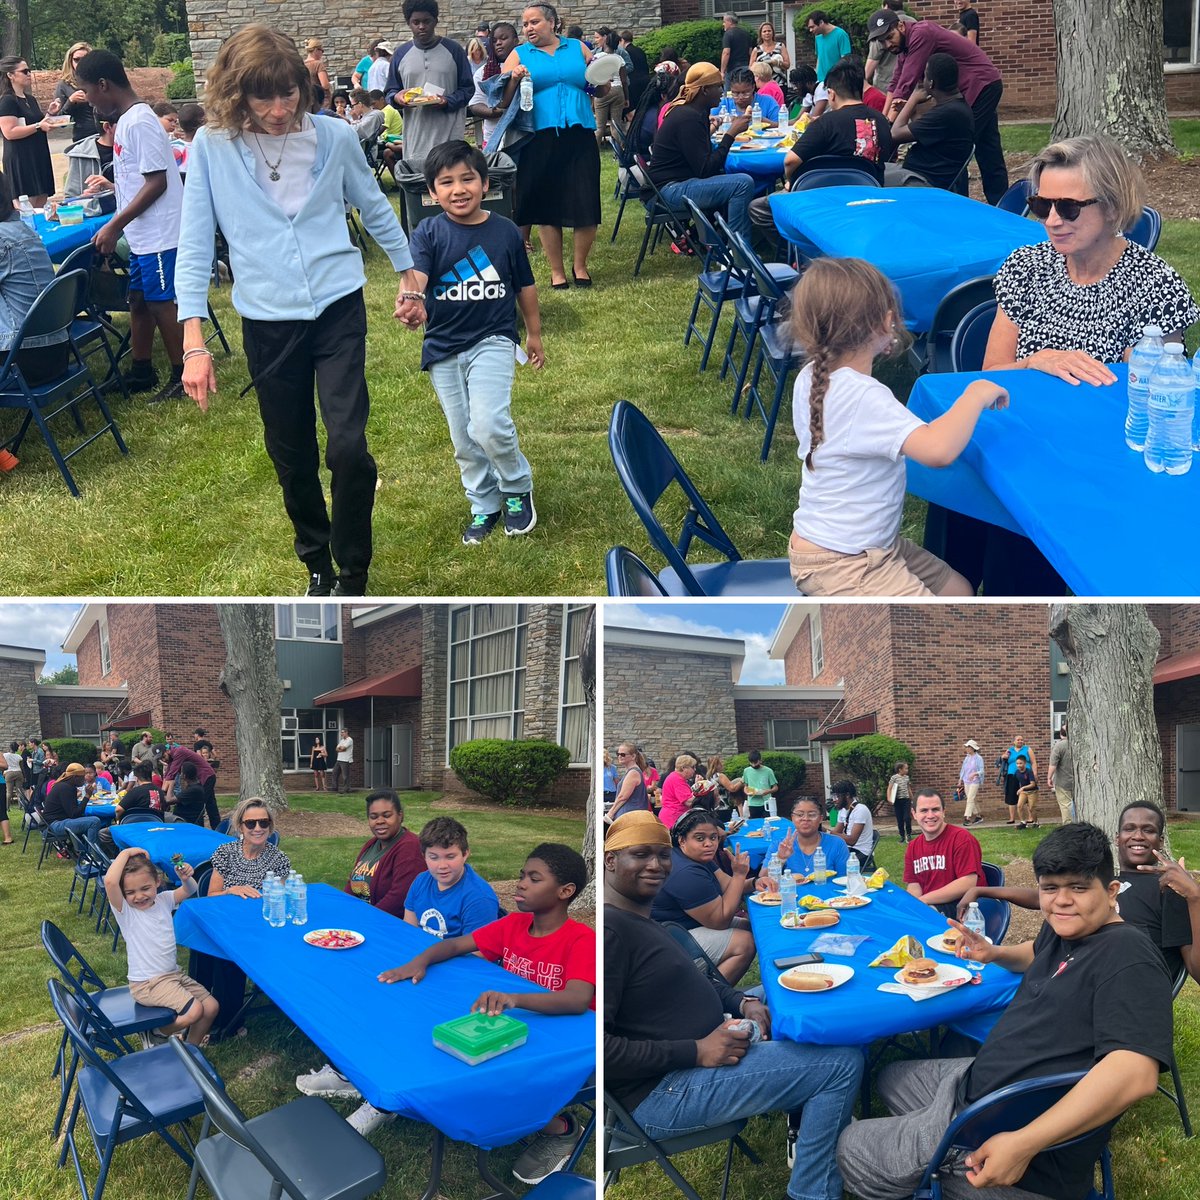 What a beautiful day for a BBQ 🍔! Yesterday, staff cooked a fun BBQ lunch for students to enjoy outside under the trees 🌳! Everyone had great manners and a fun time!
#bbqlife #bbqtime #bbqfood #barbecue #BarbecueTime #BarbecueTime